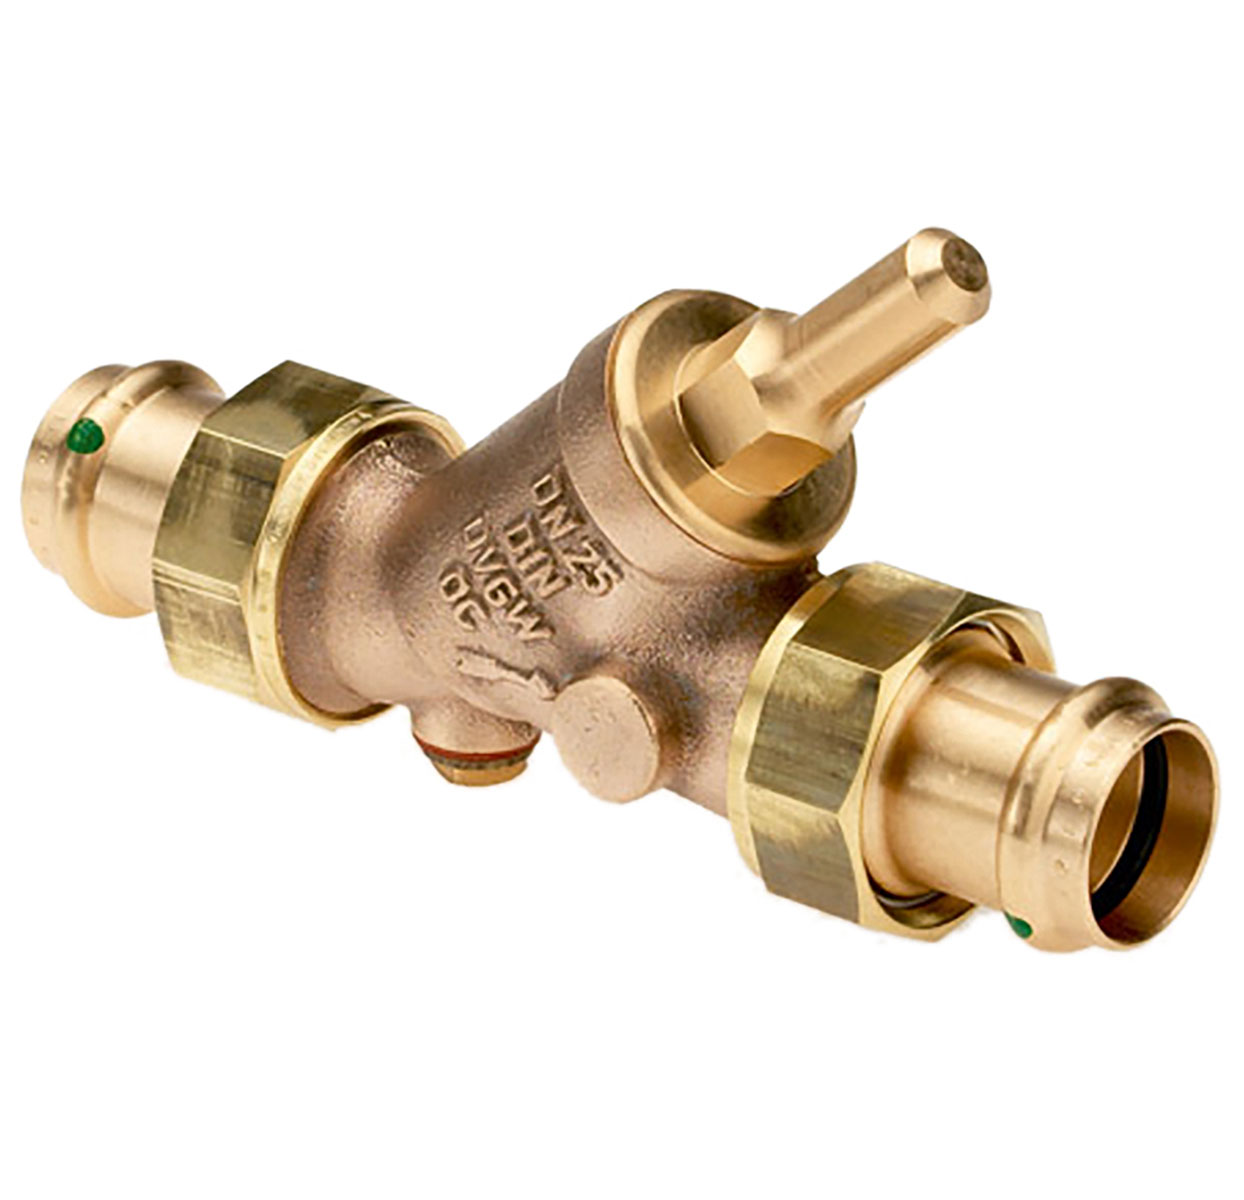 3730150 - Red-brass Backflow-preventer male thread, Viega Profipress, without drain valve